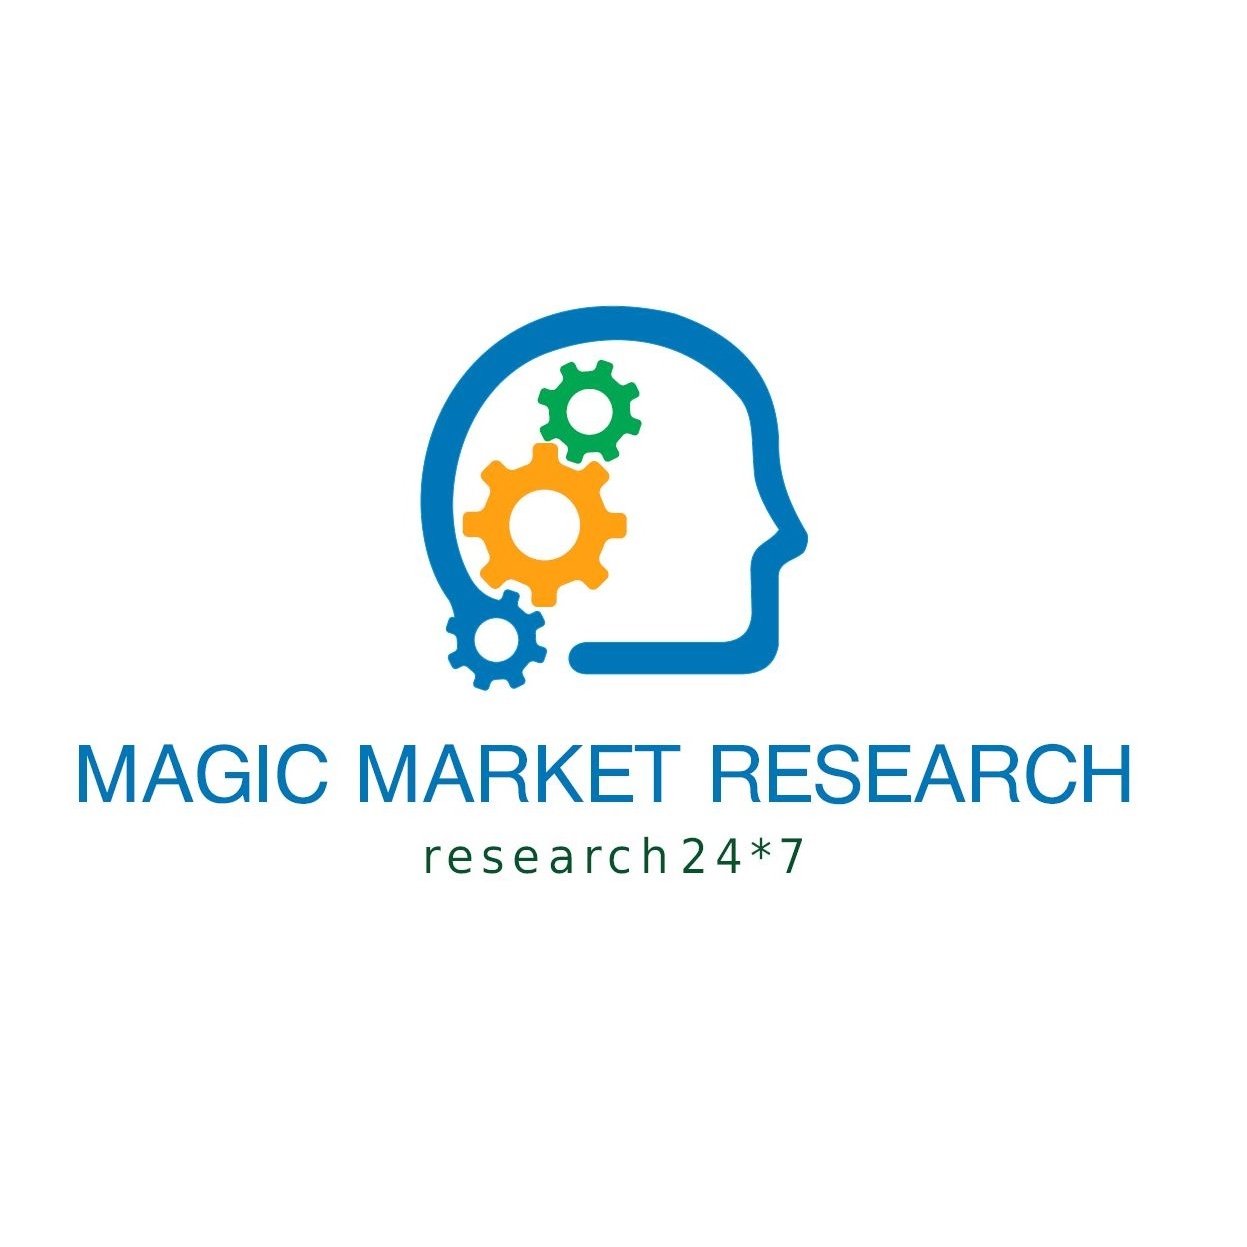 MAGIC MARKET RESEARCH is a Business Consulting Service firm providing multiple services to companies wishing to engage in any business expansion.